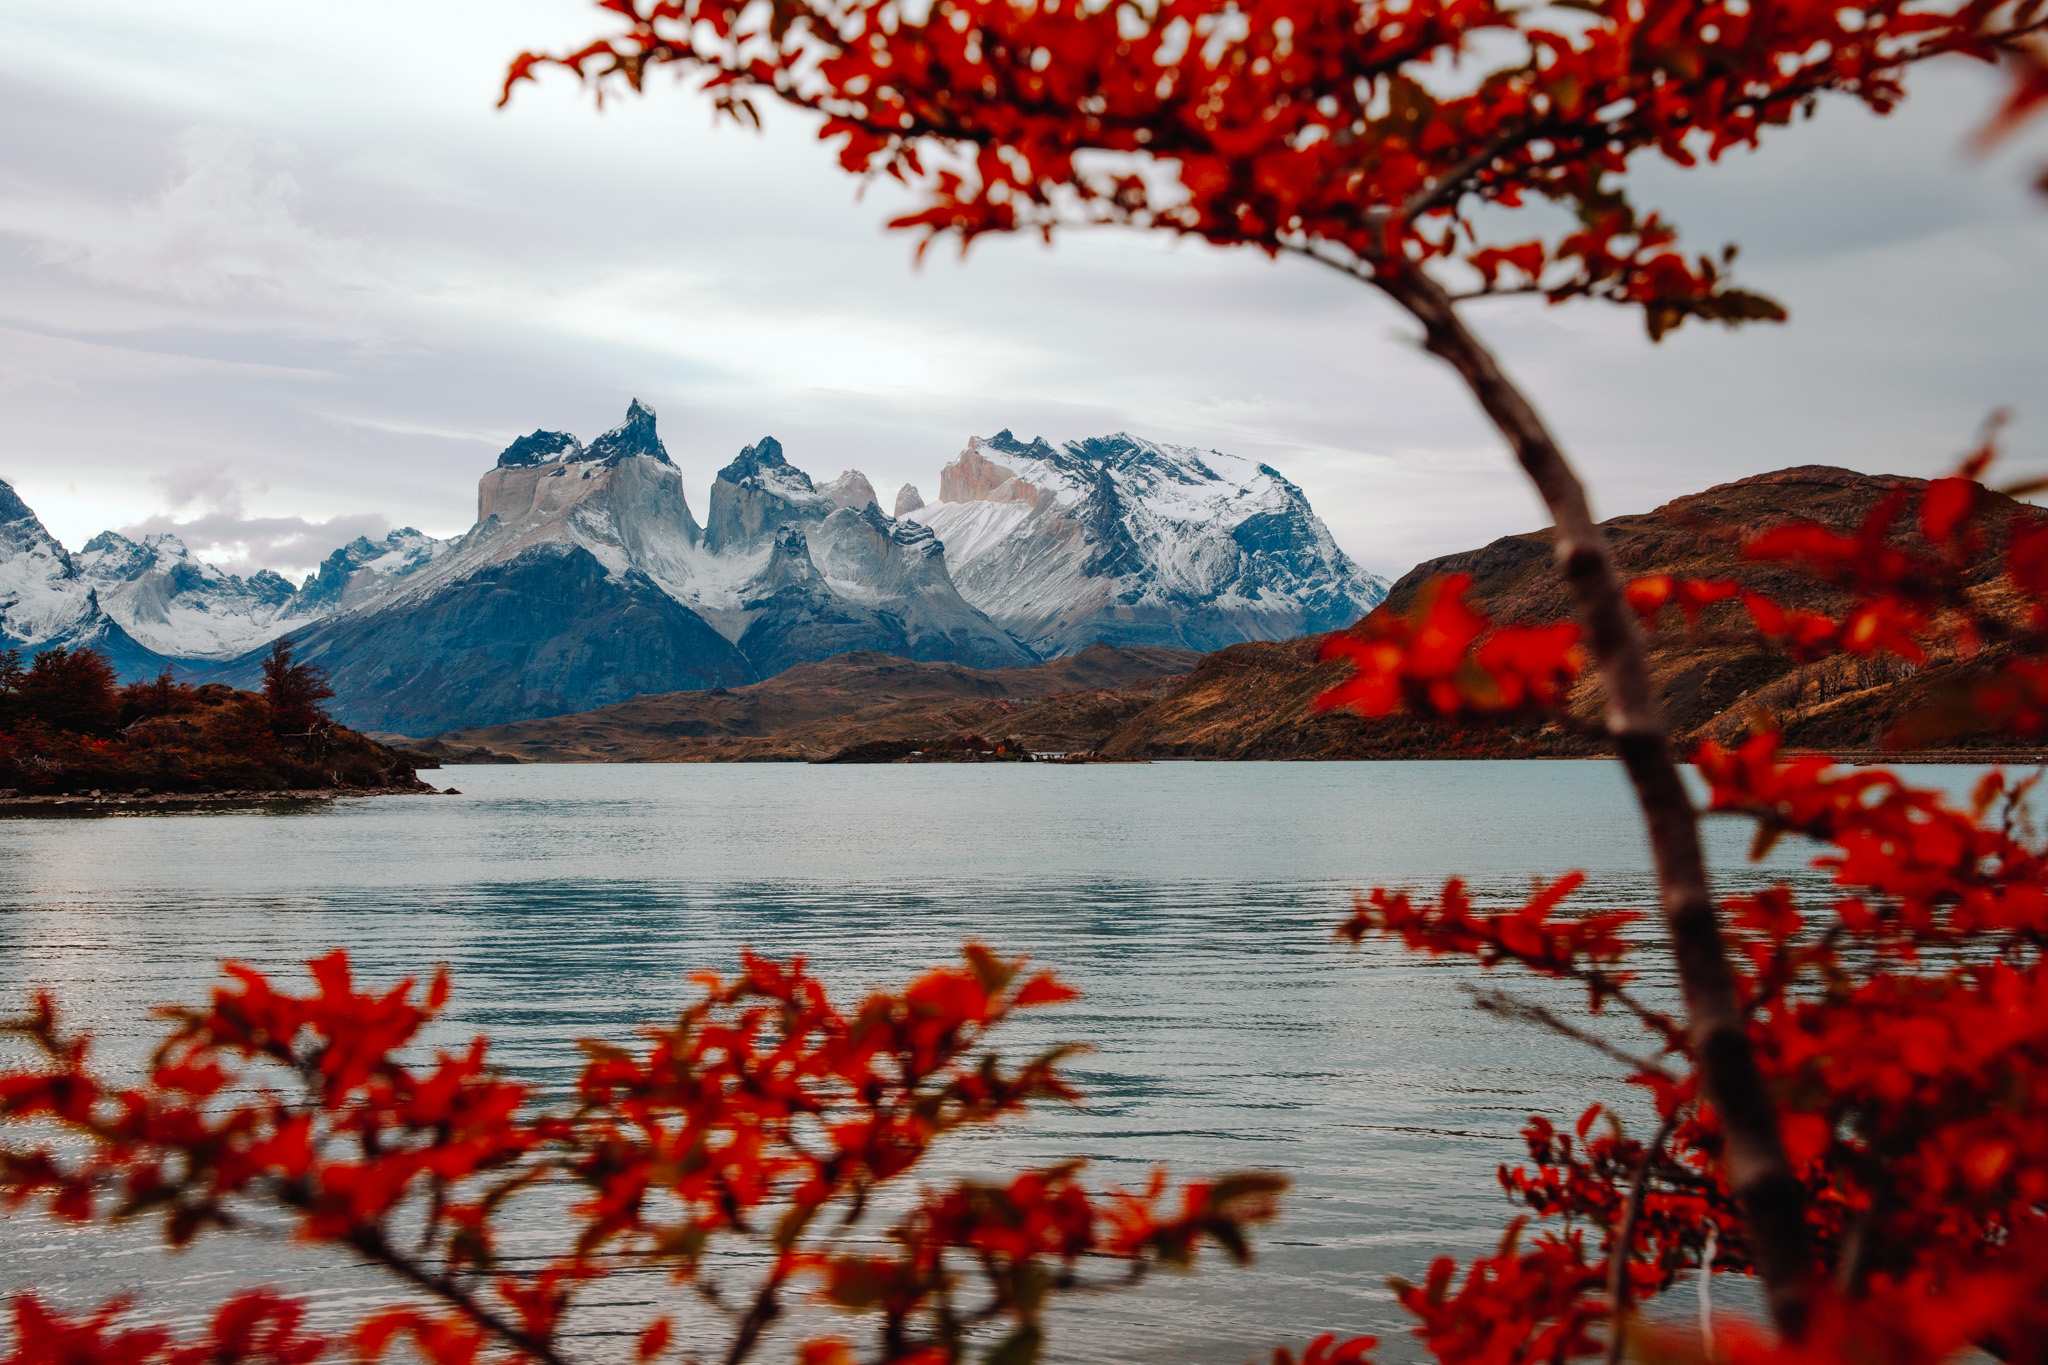 Mountains of Patagonia in the background; bush with red leaves in the foreground